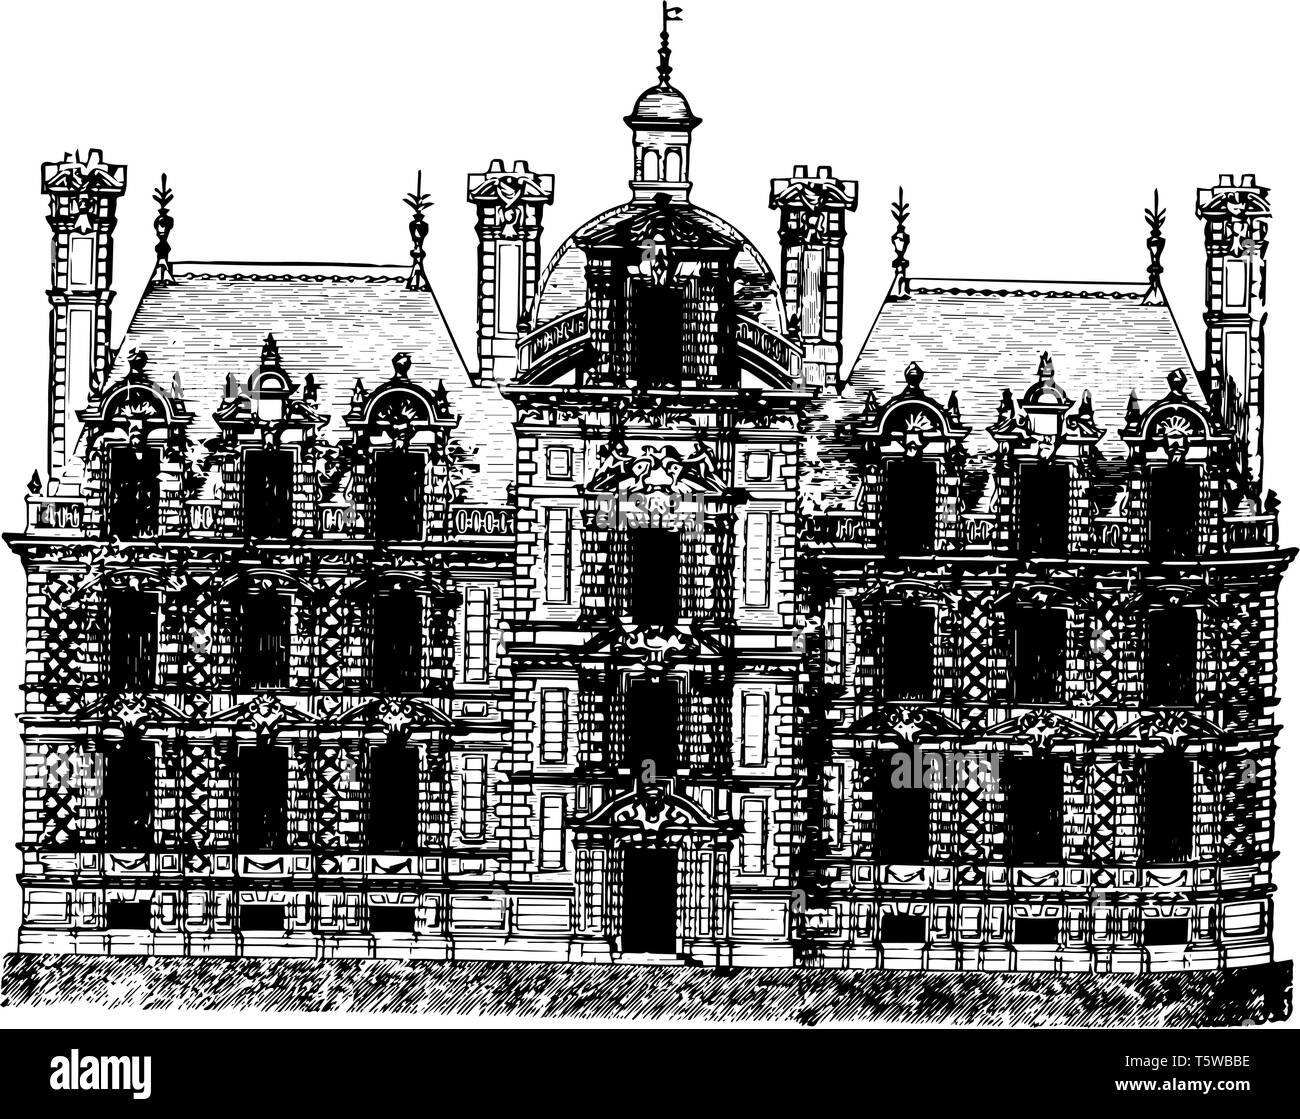 Château de Beaumesnil lowest level of administrative division wife Marie Dauvet Desmaret case of the windows the free to stone the forms of quoins vin Stock Vector